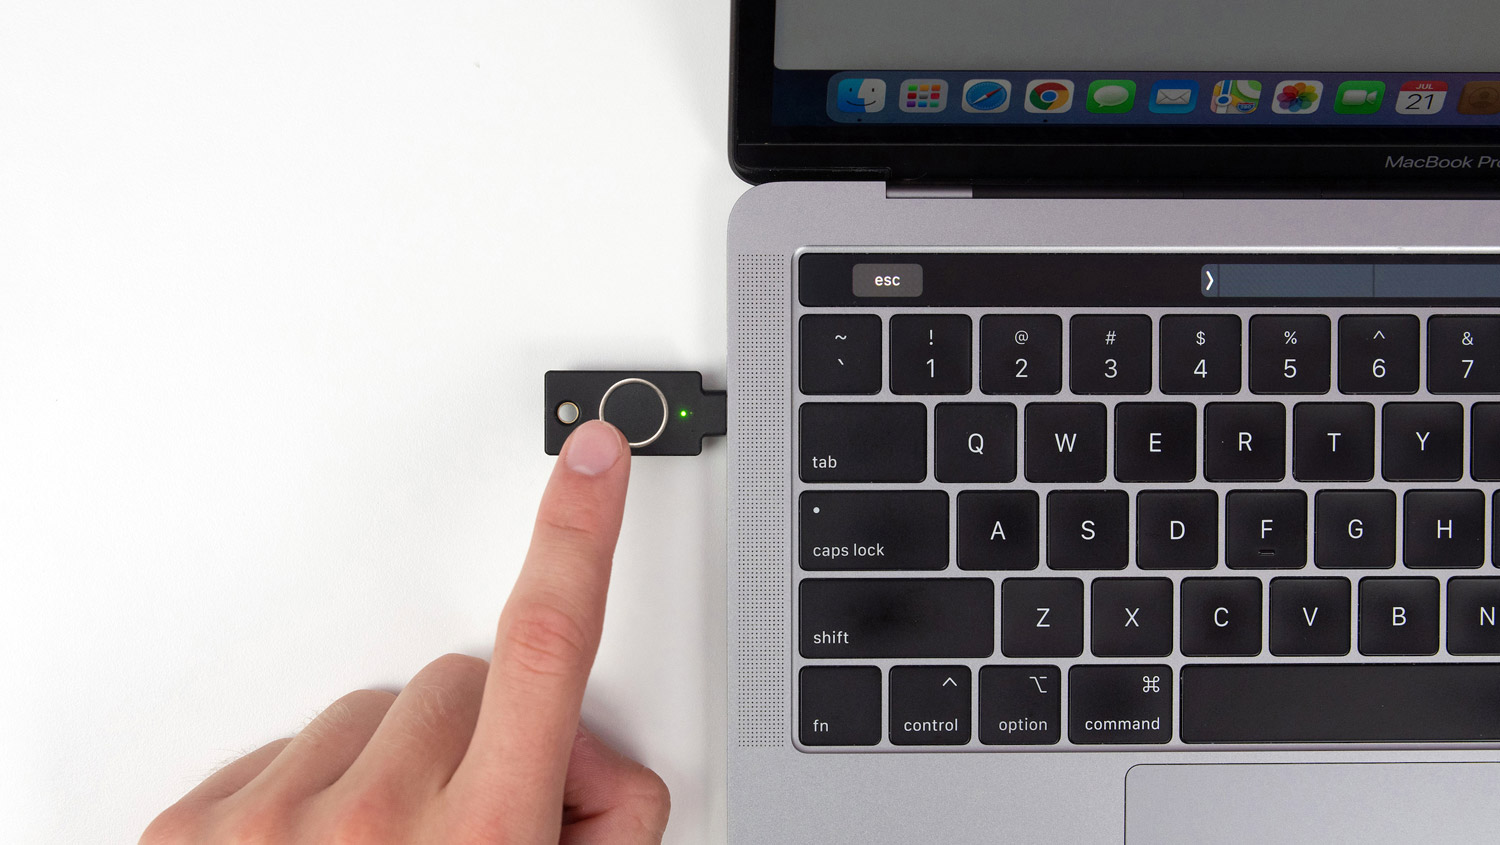 Yubico's new fingerprint security key can keep you from getting